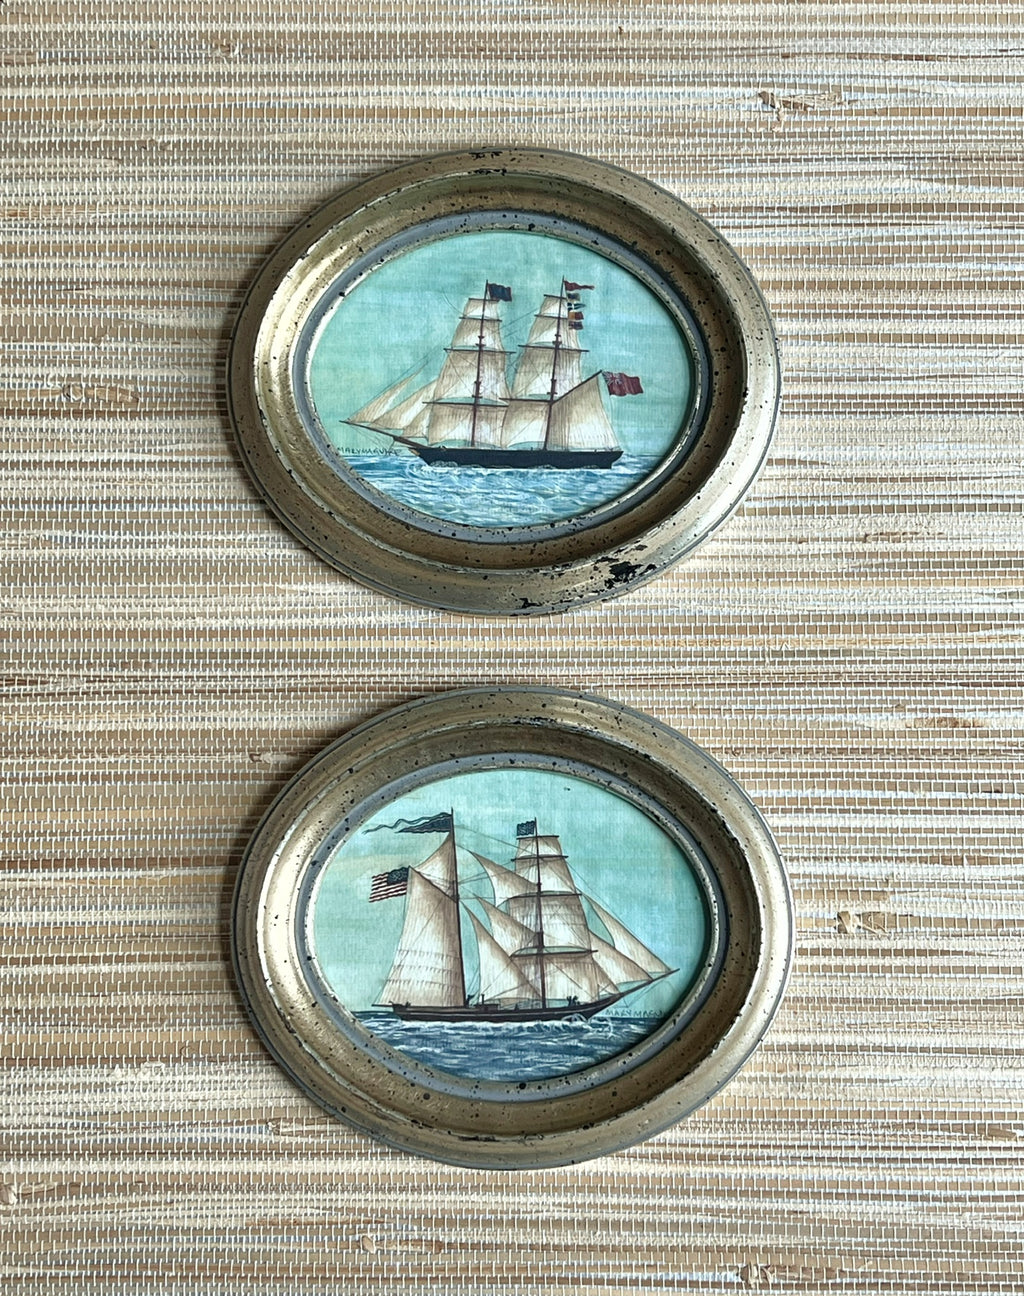 The Ship 'Eileen' and the Ship 'Elizabeth' -miniatures